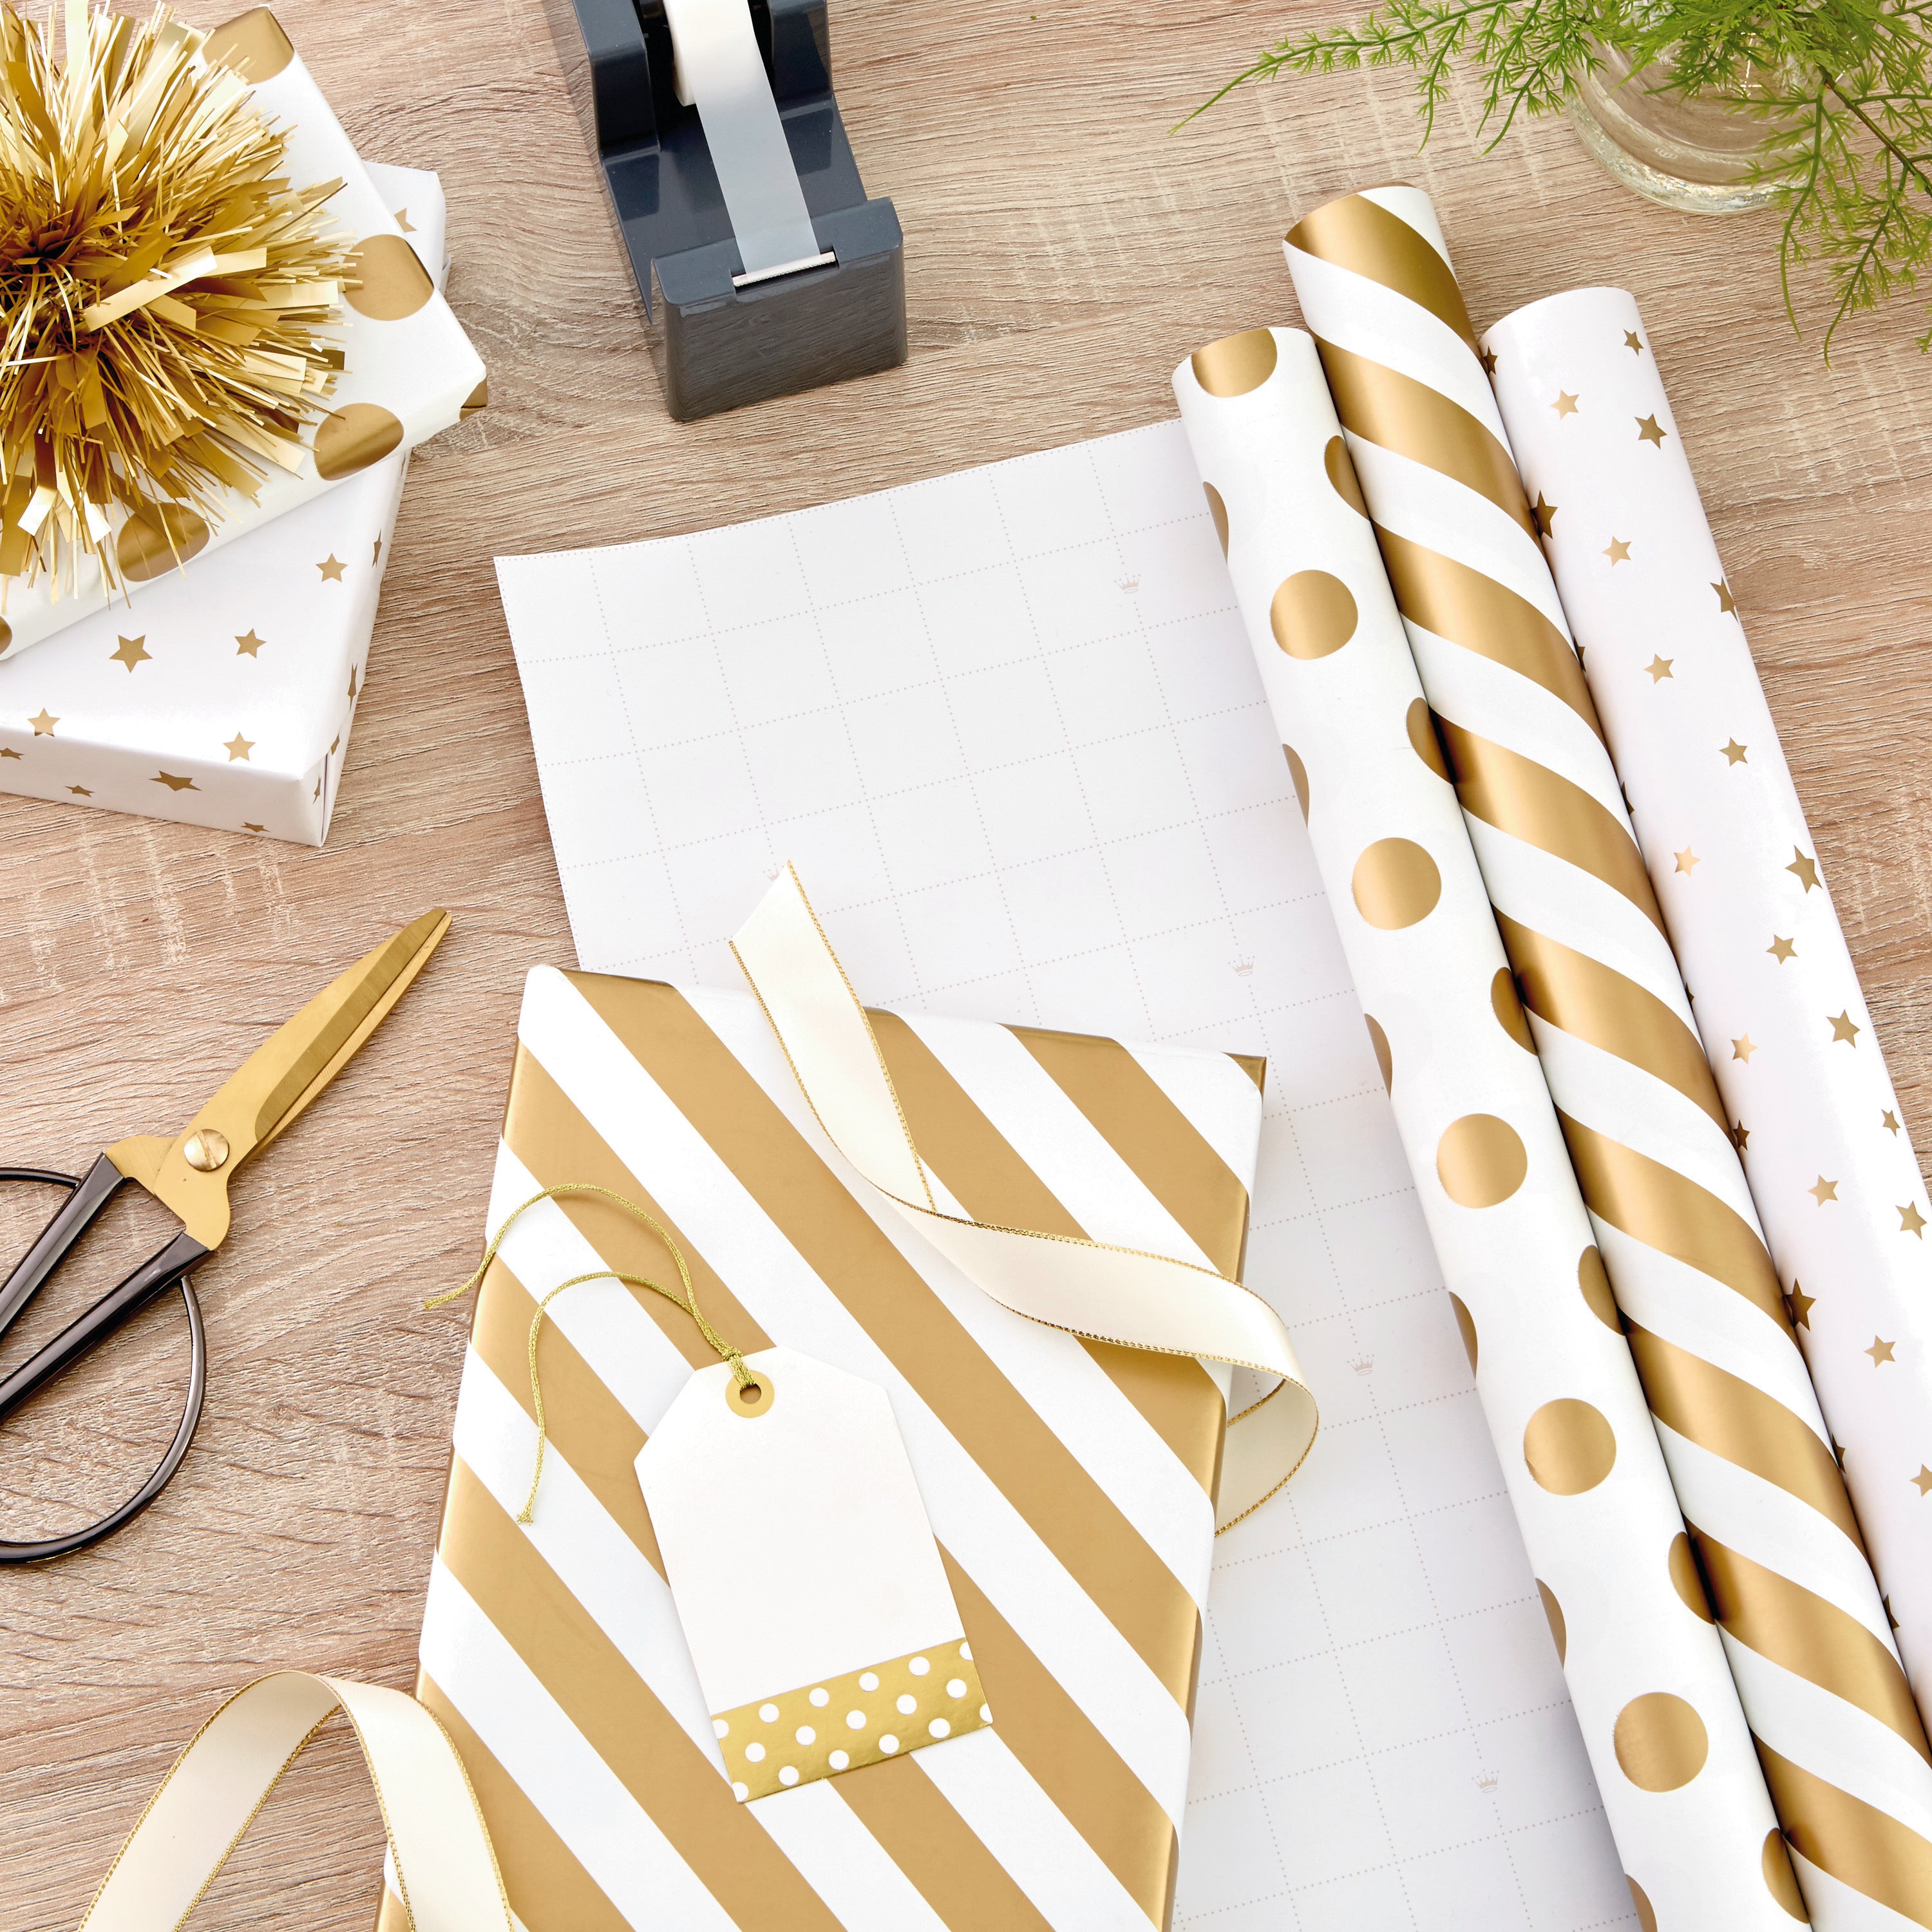 Hallmark All Occasion Wrapping Paper Bundle with Cut Lines on Reverse - White and Gold (3-Pack: 105 sq. ft. ttl.) for Birthdays, Weddings, Valentine's Day, Graduations, Engagements, Bridal Showers and More